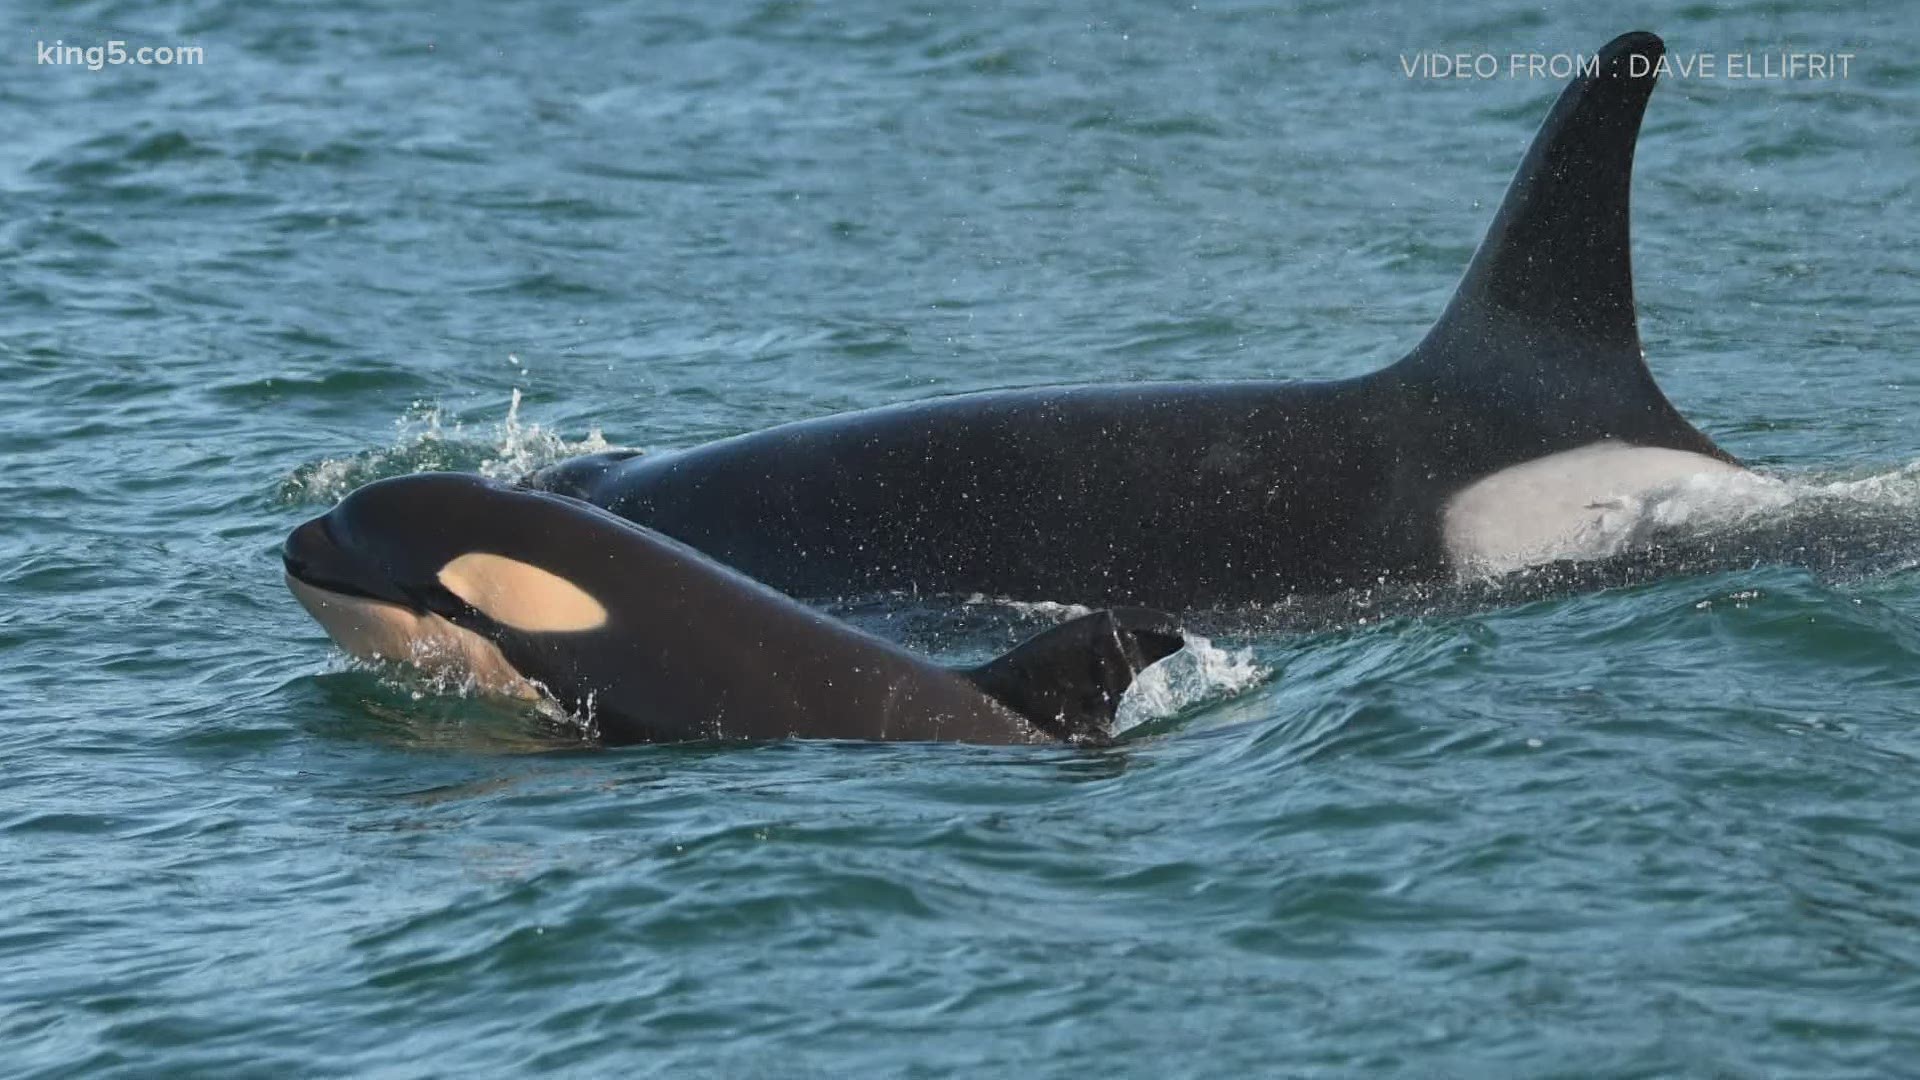 The Washington State Department of Fish and Wildlife said a nursing orca needs even more space from boaters to make sure she gets plenty of food to feed her baby.